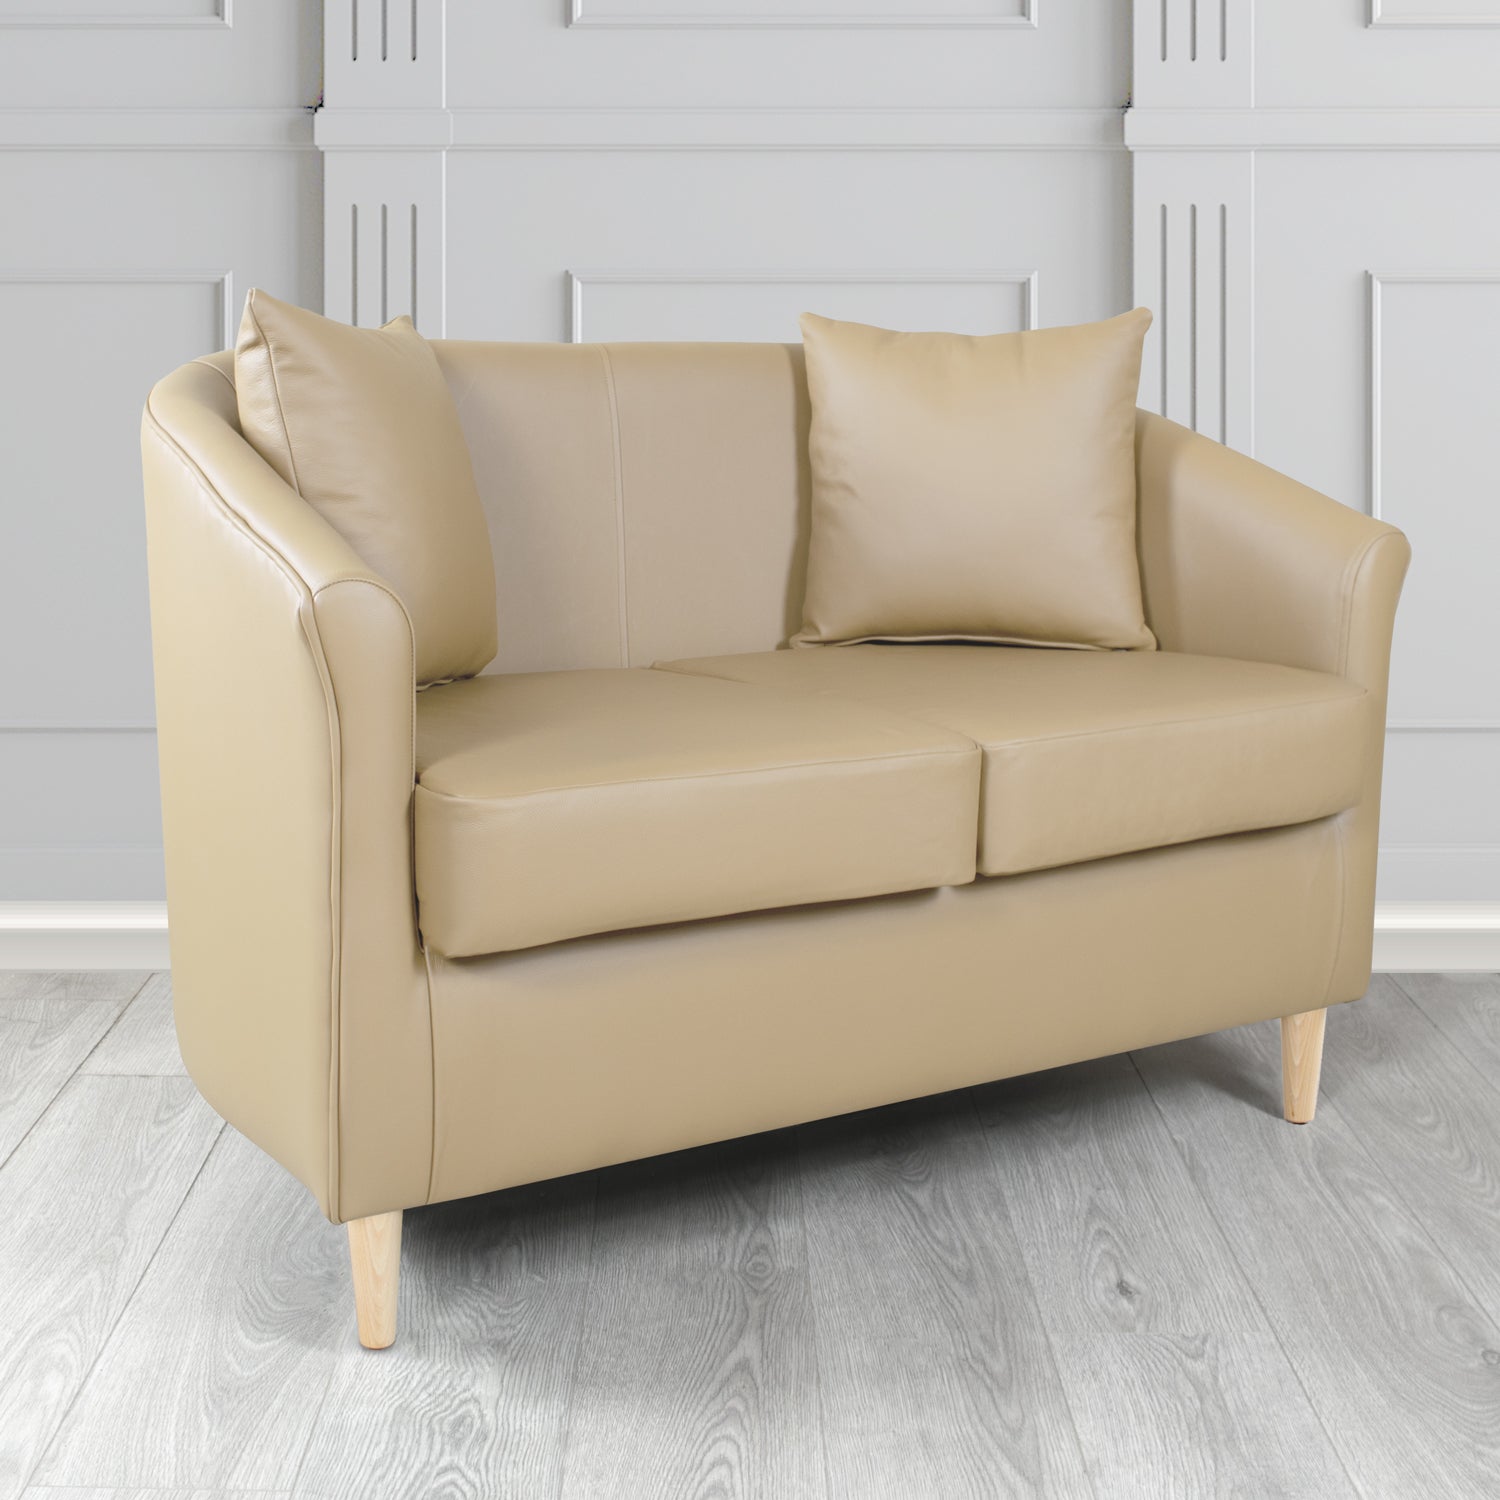 St Tropez Shelly Basket Crib 5 Genuine Leather 2 Seater Tub Sofa with Scatter Cushions - The Tub Chair Shop